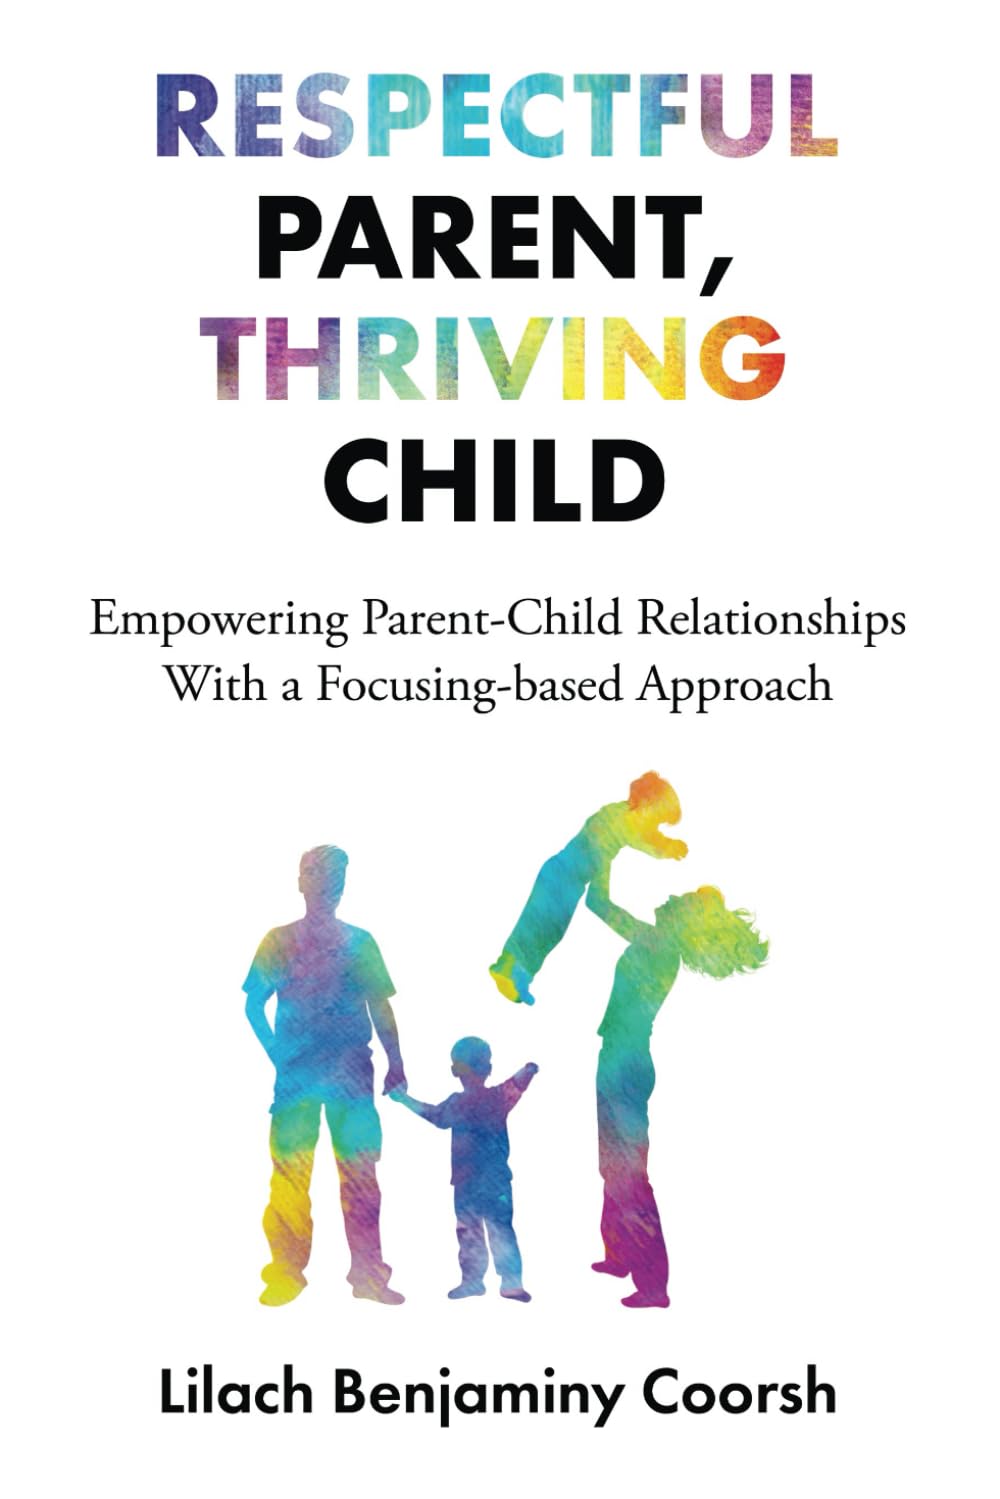 Respectful Parent, Thriving Child: Empowering Parent-Child Relationships With a Focusing-based Approach